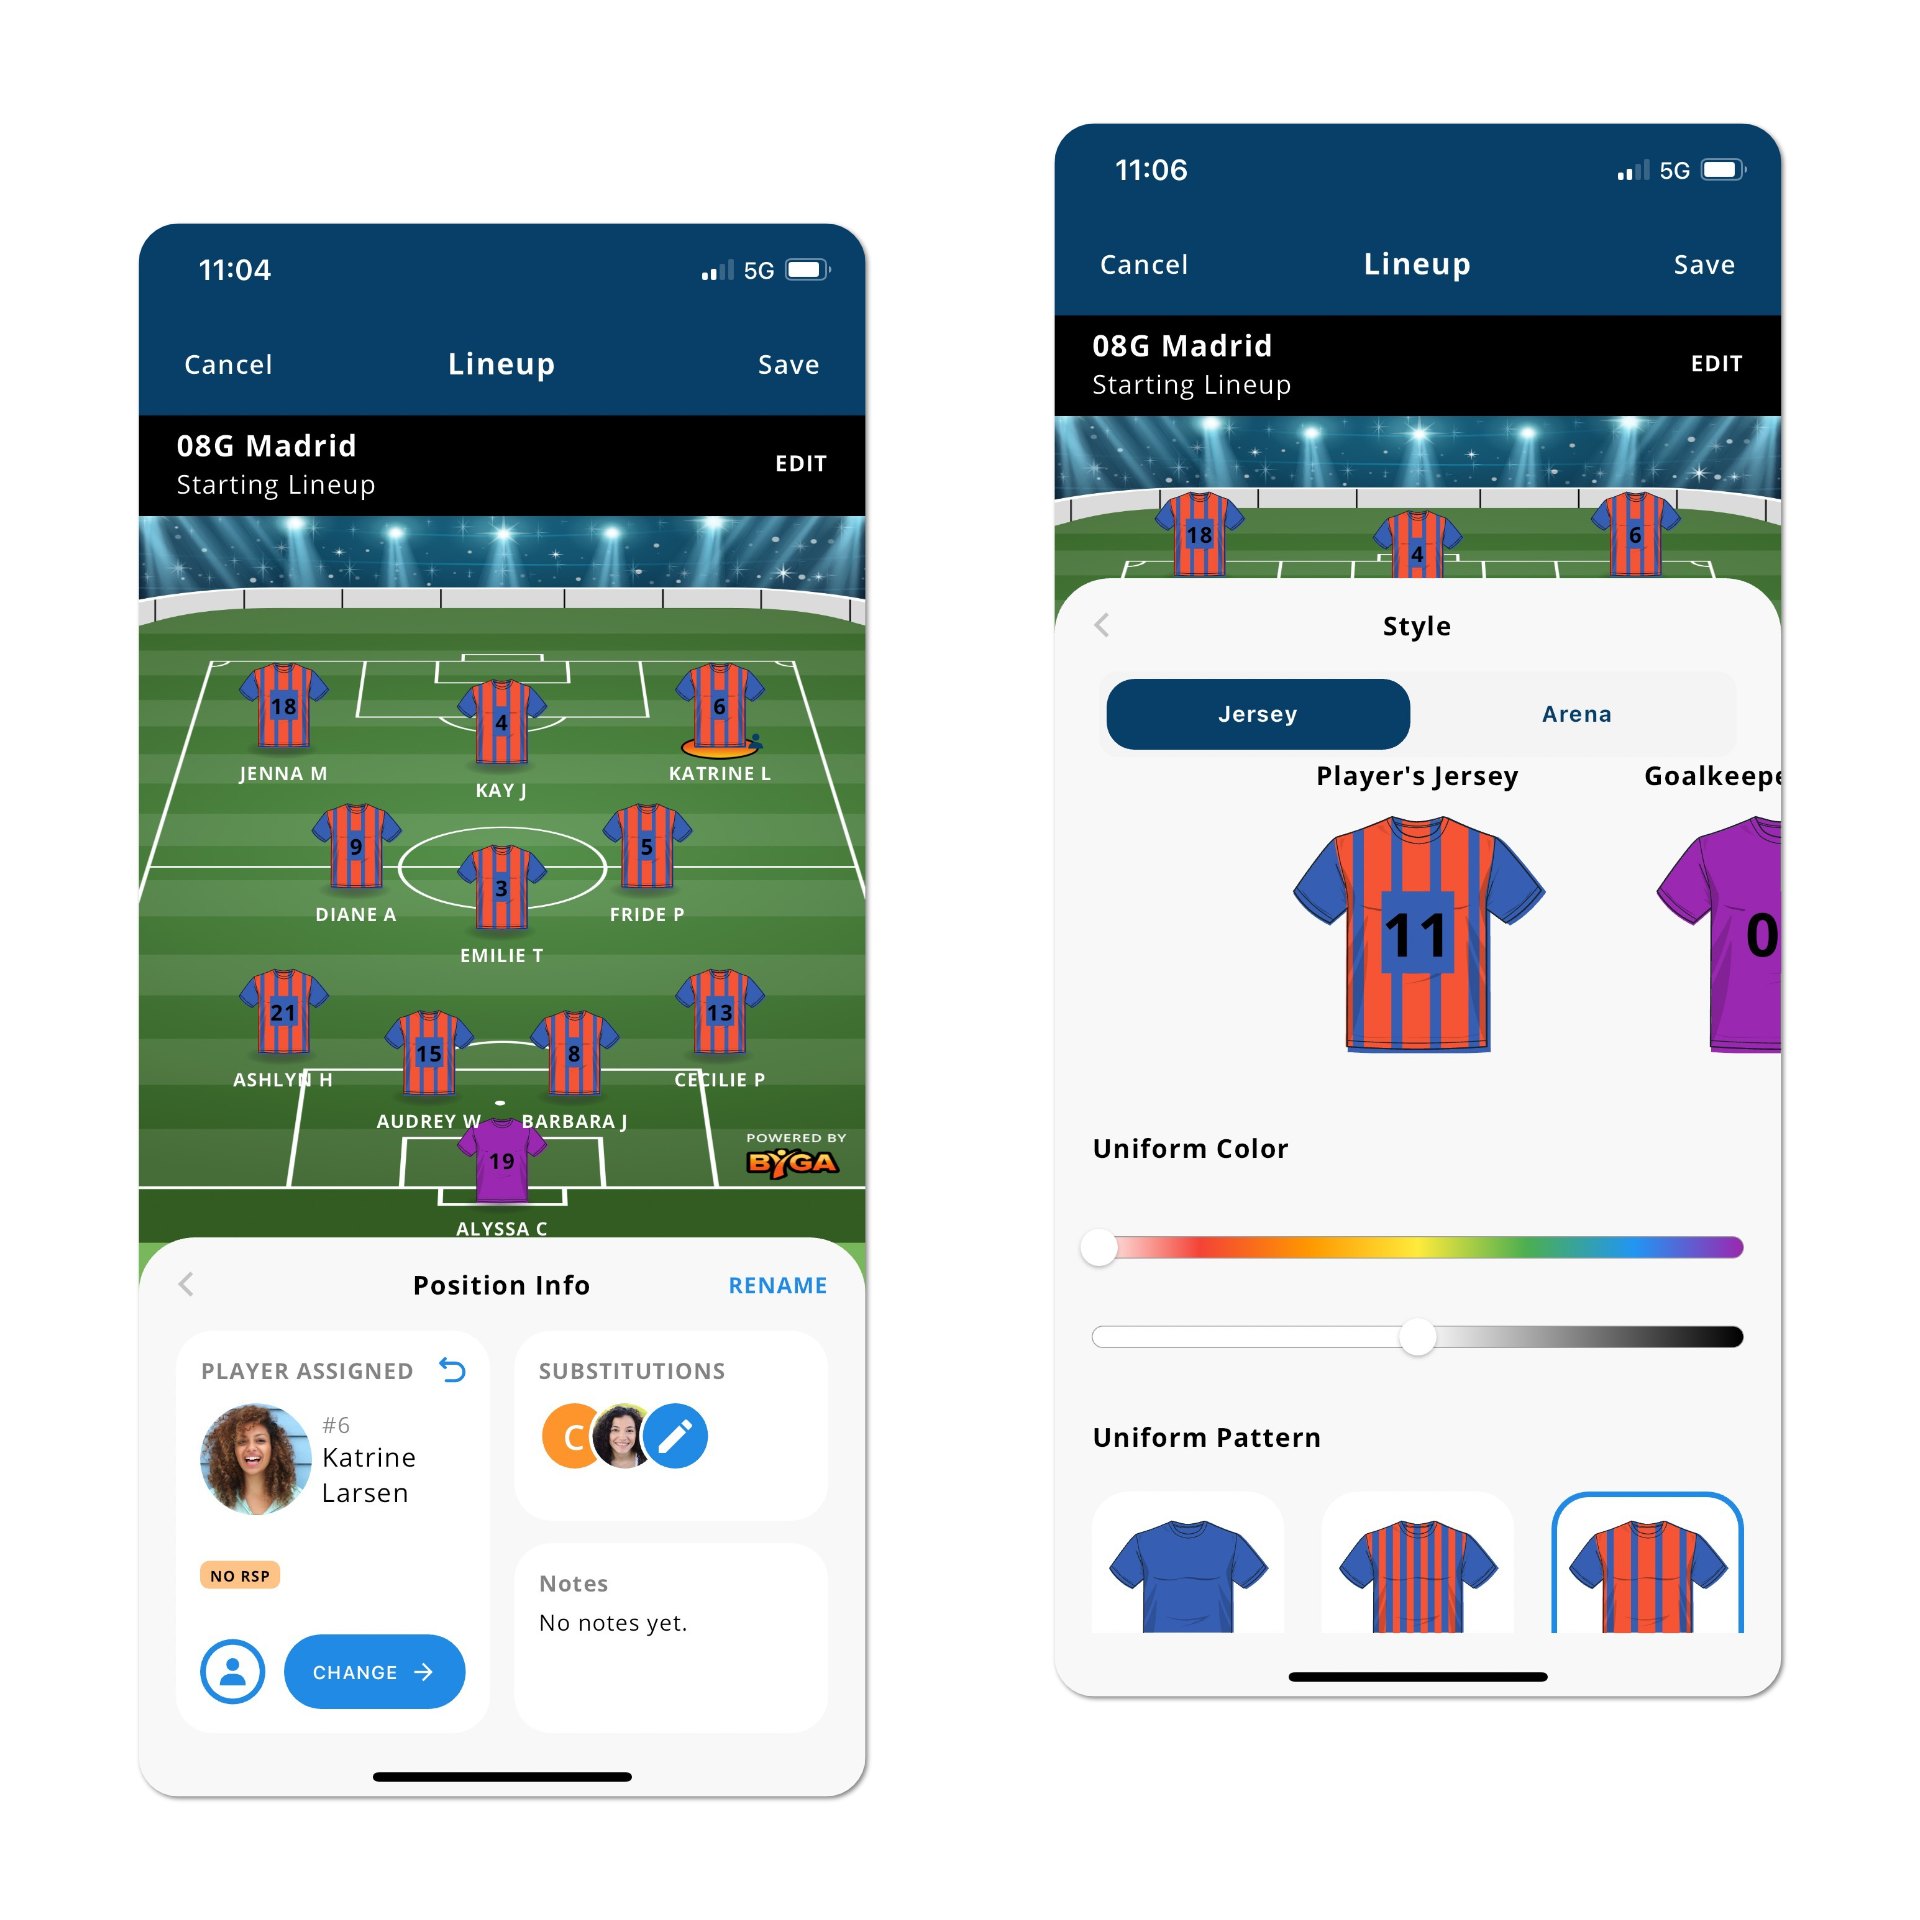 Mobile phone images of Byga app with lineup features like formation and jersey colors